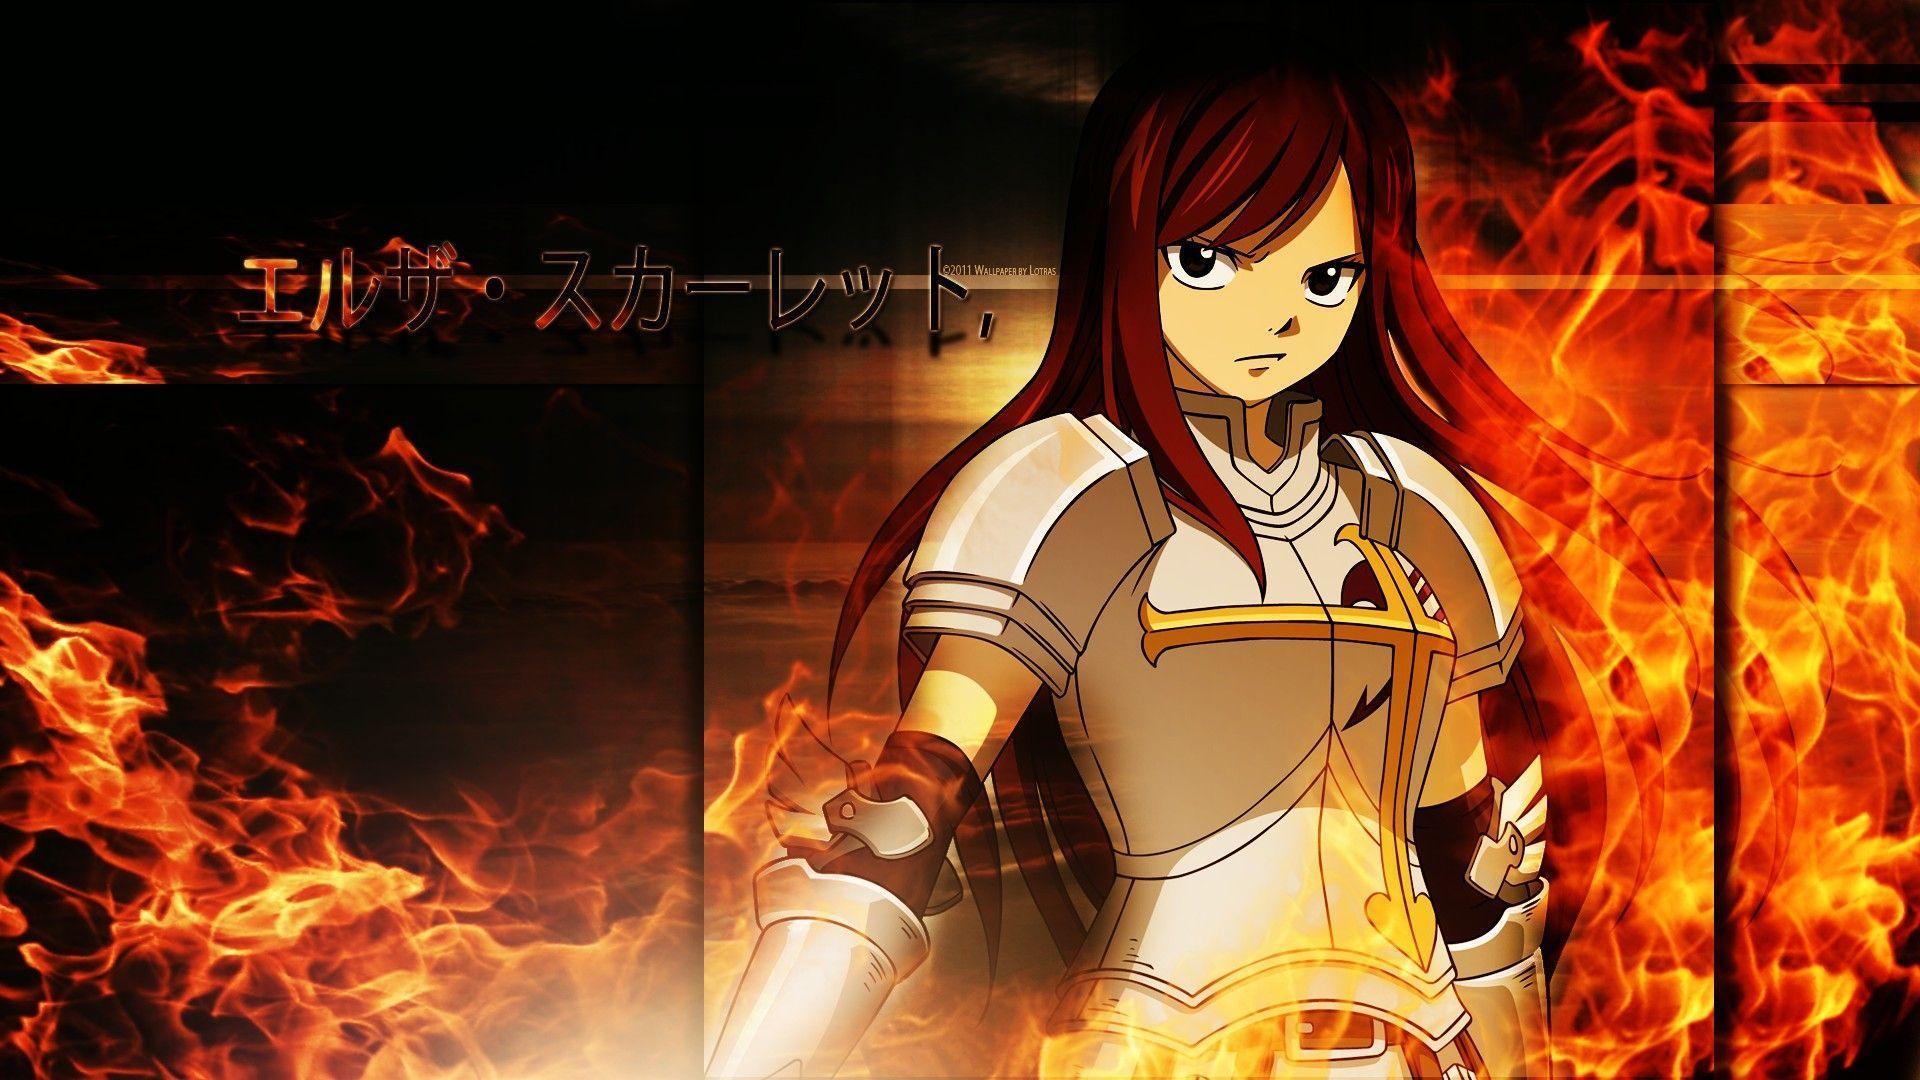 Fairy Tail Erza Wallpapers